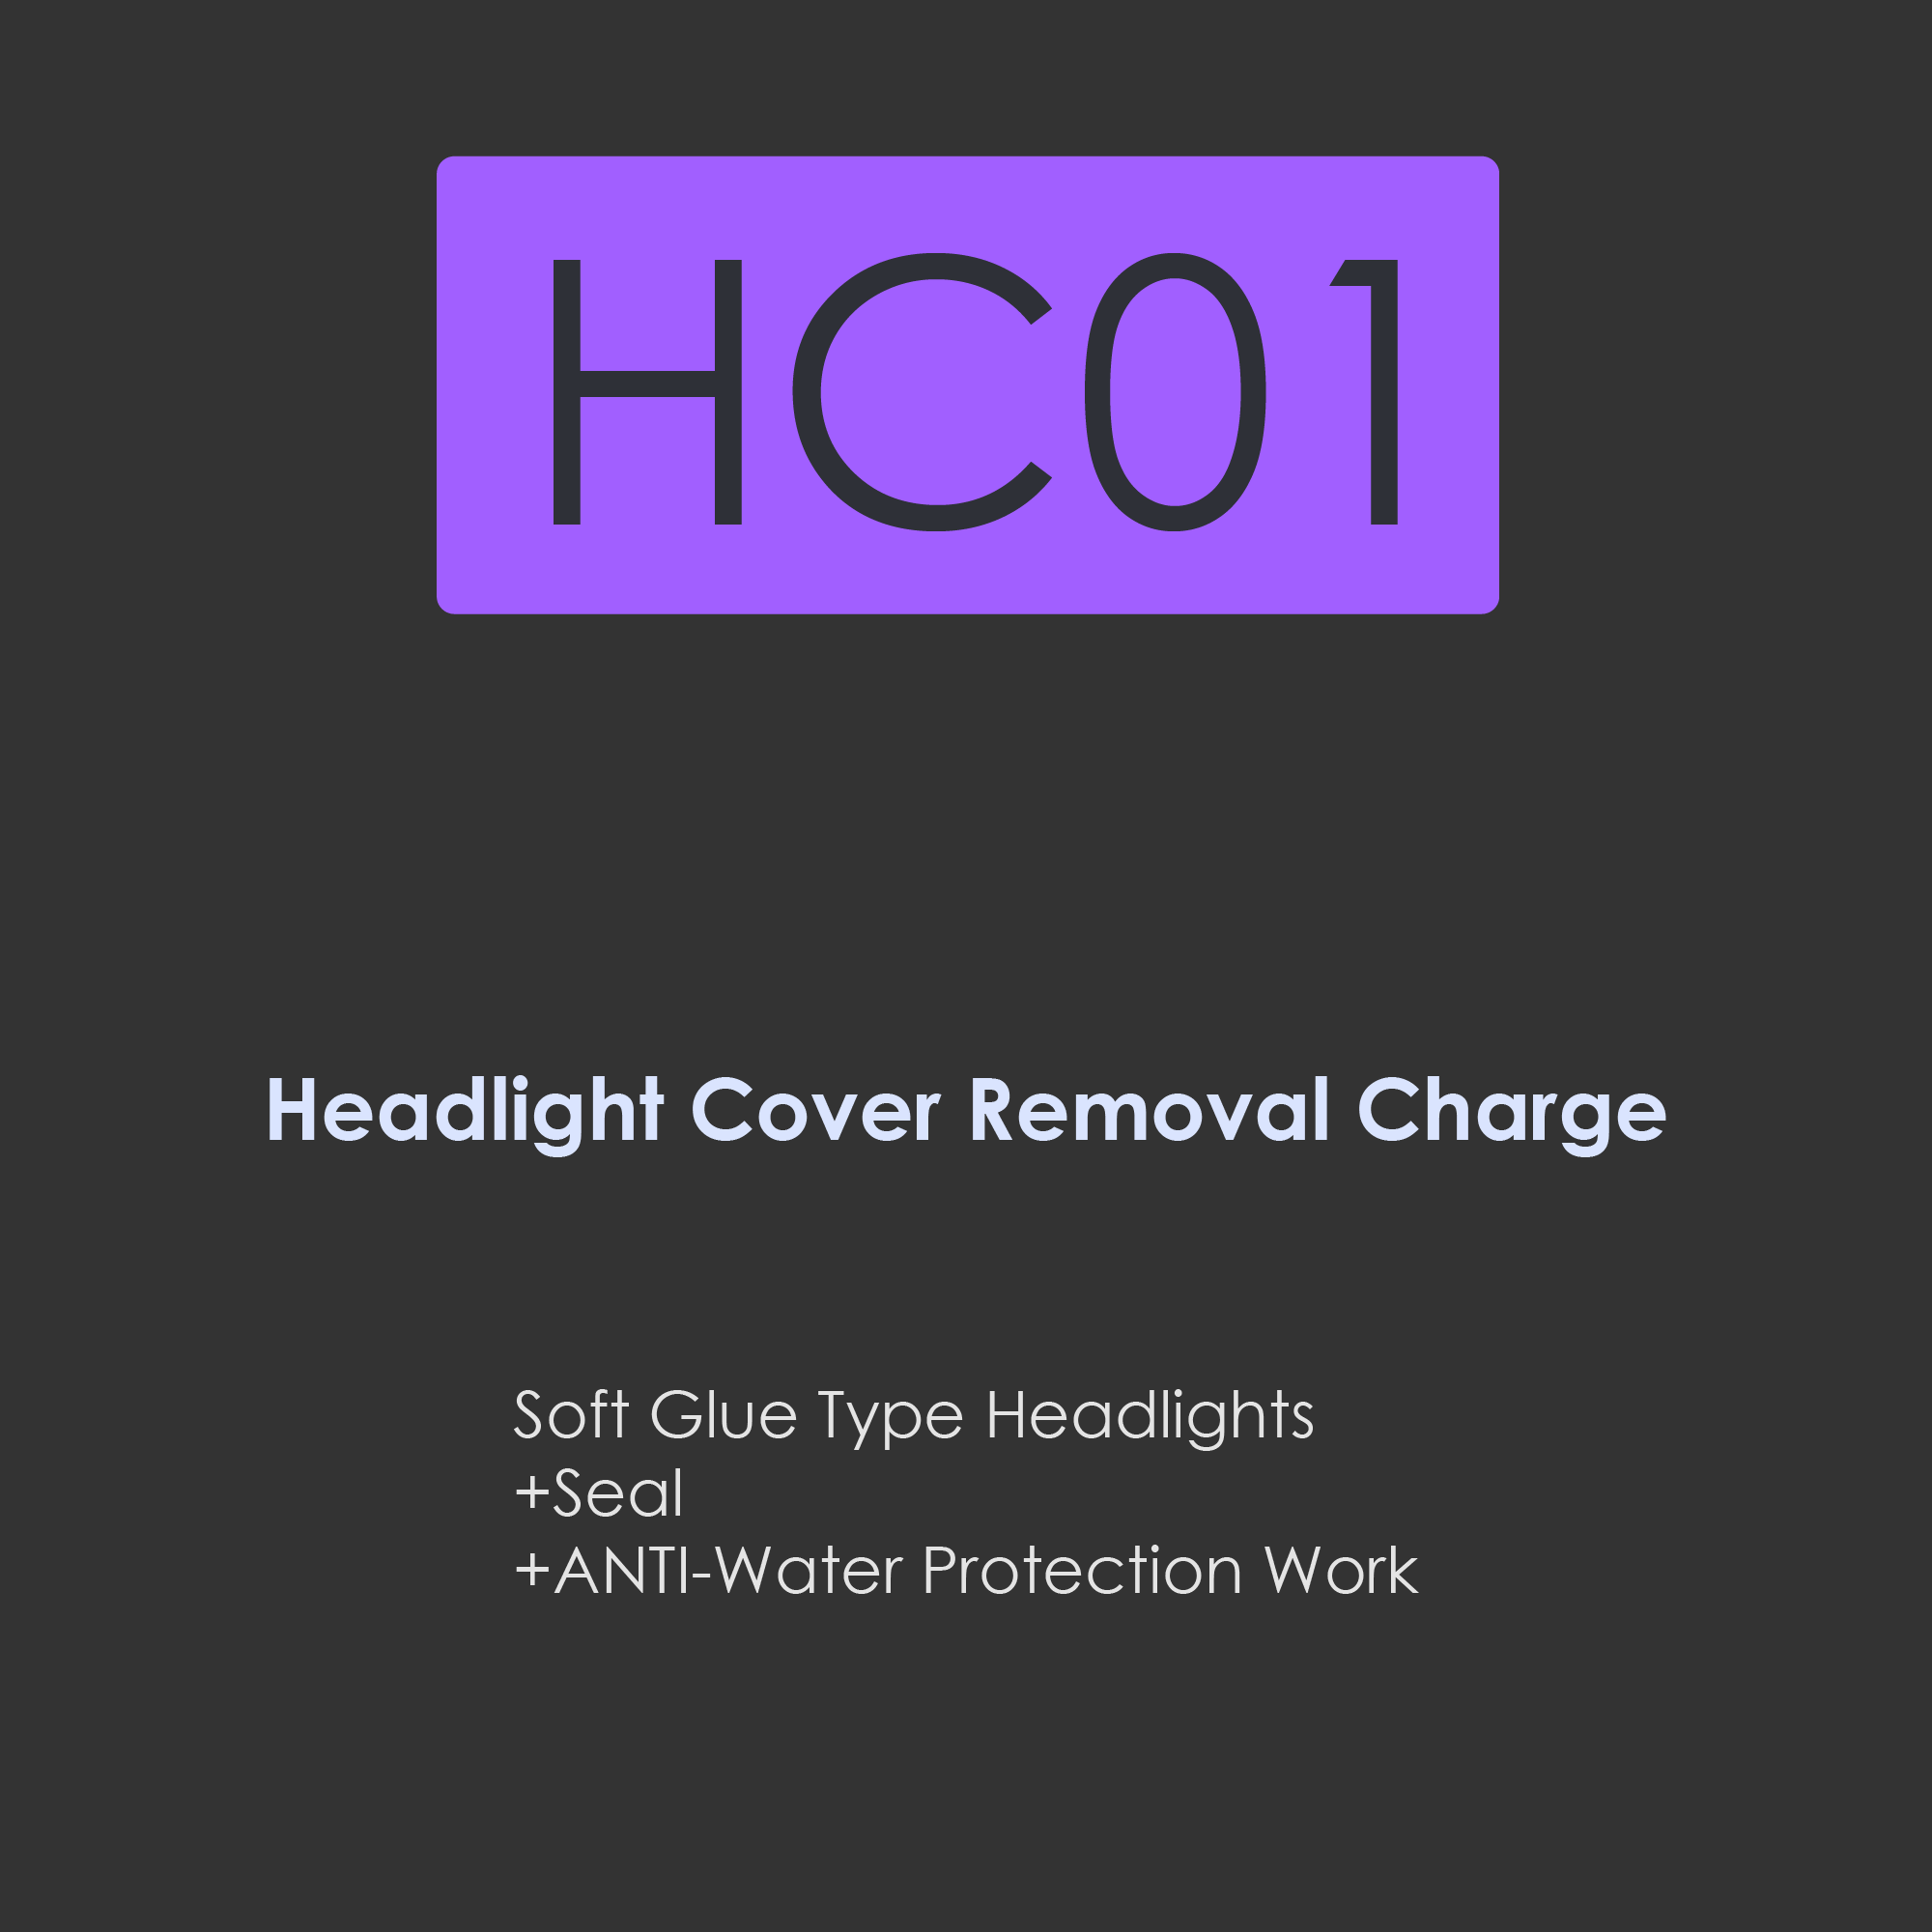 HC01-headlight cover removal charge for soft glue type headlights+seal+anti-water protection work